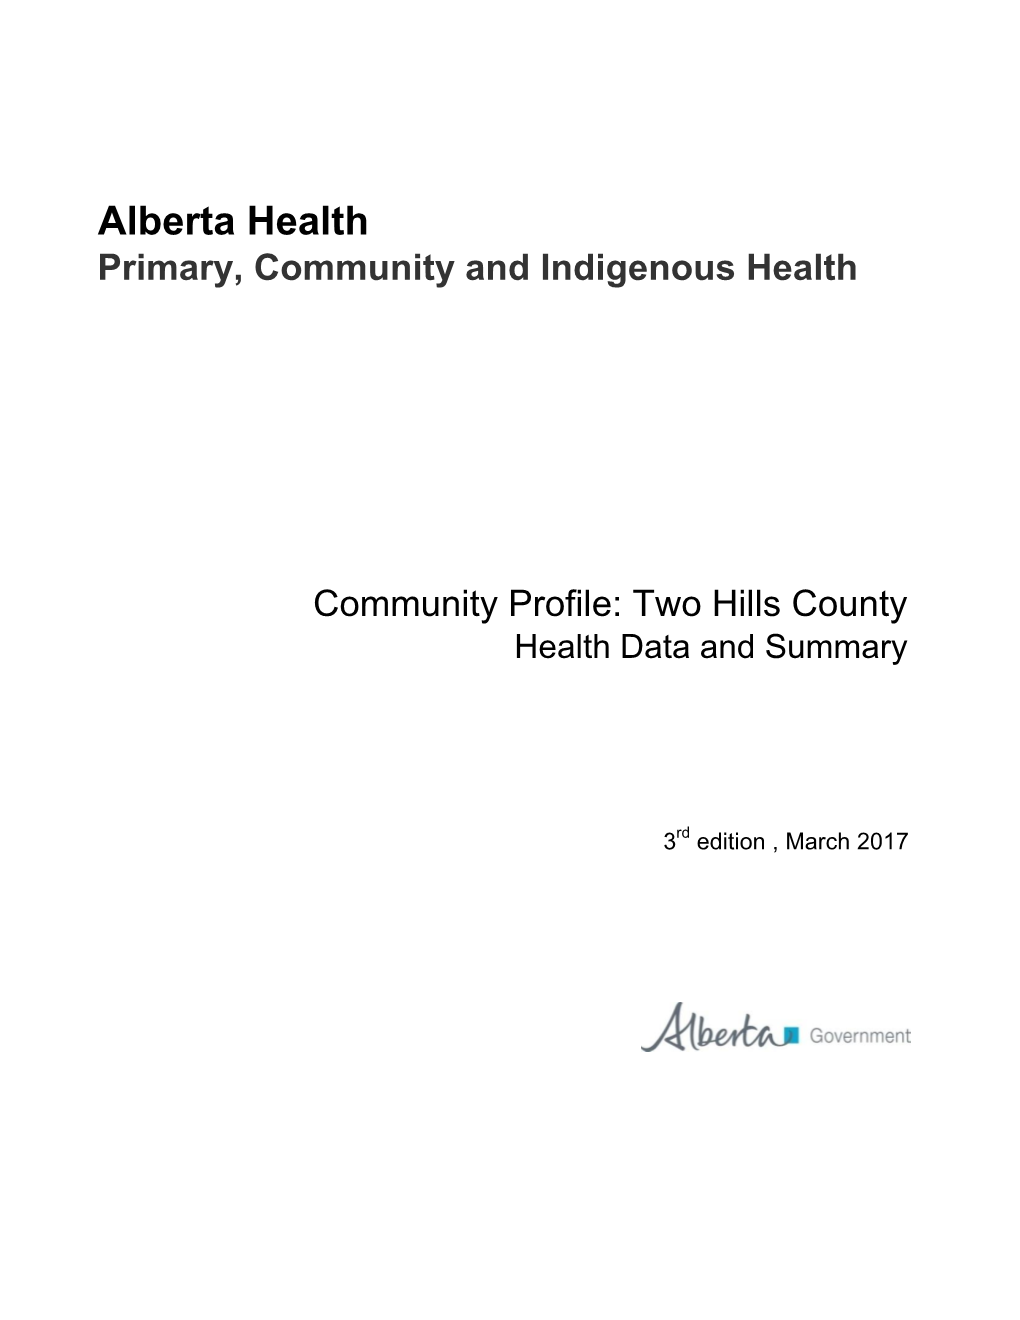 Two Hills County Health Data and Summary